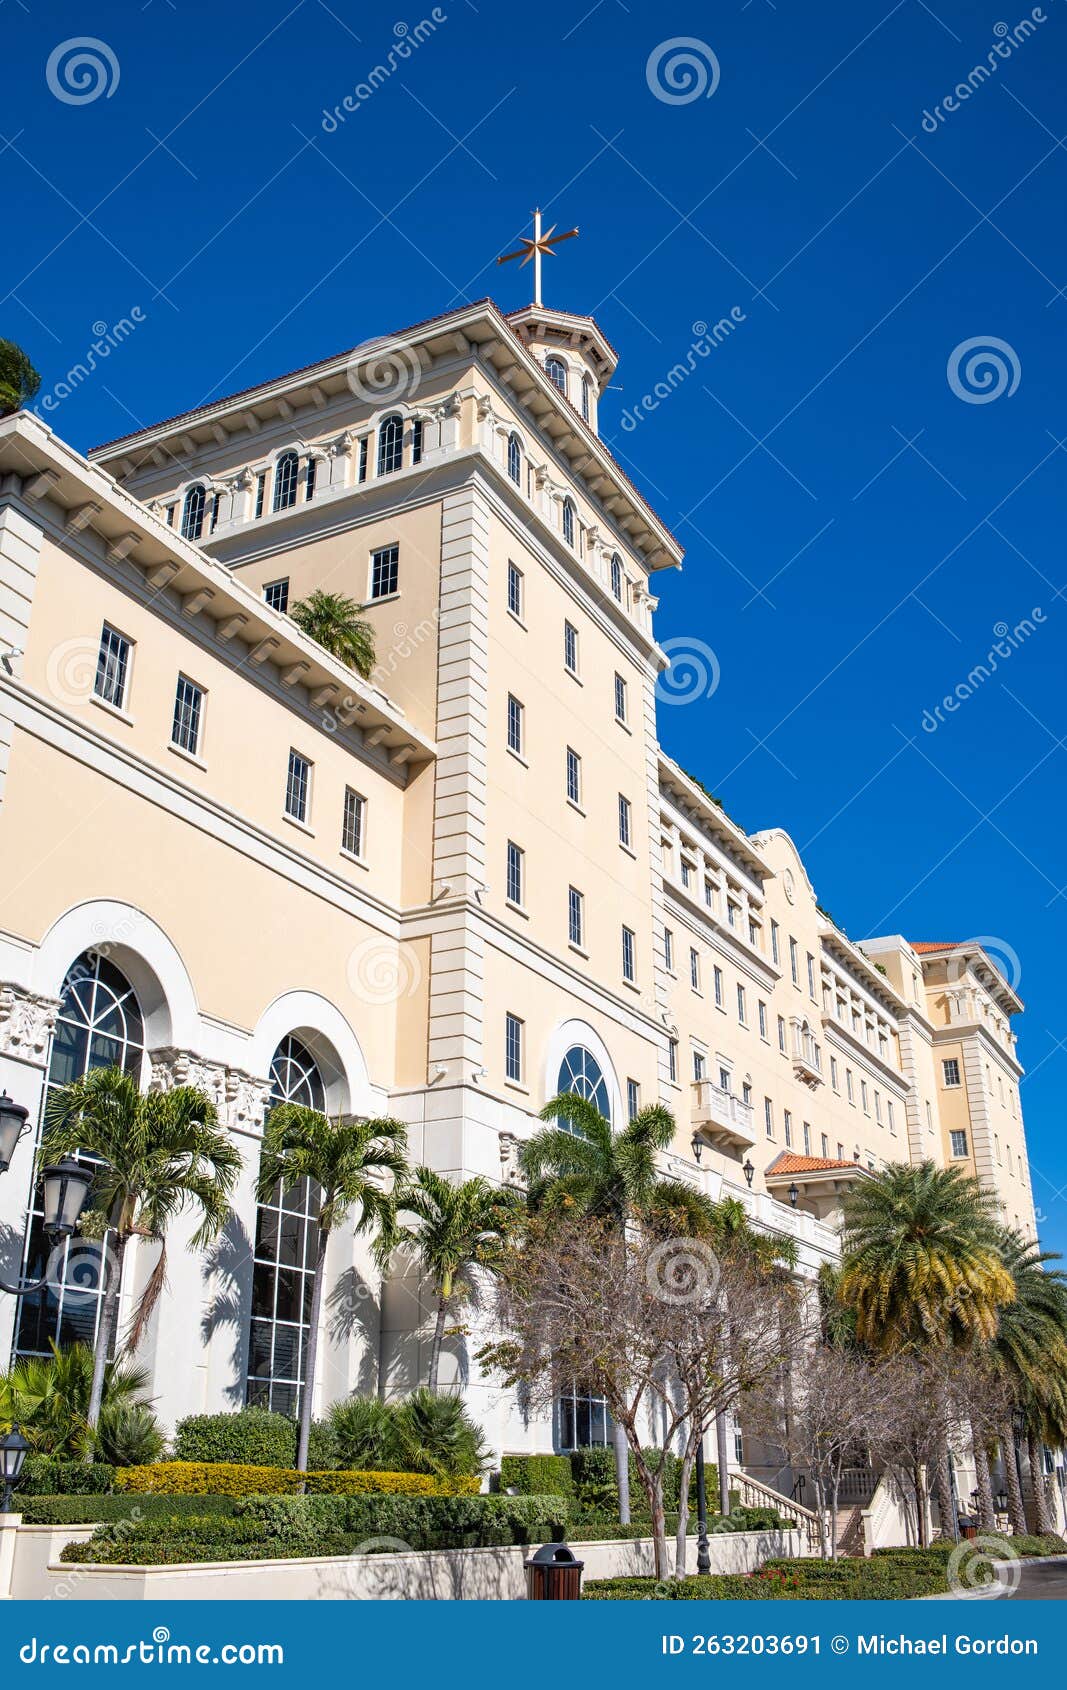 Church of Scientology Building in Clearwater, Florida Editorial Photo ...